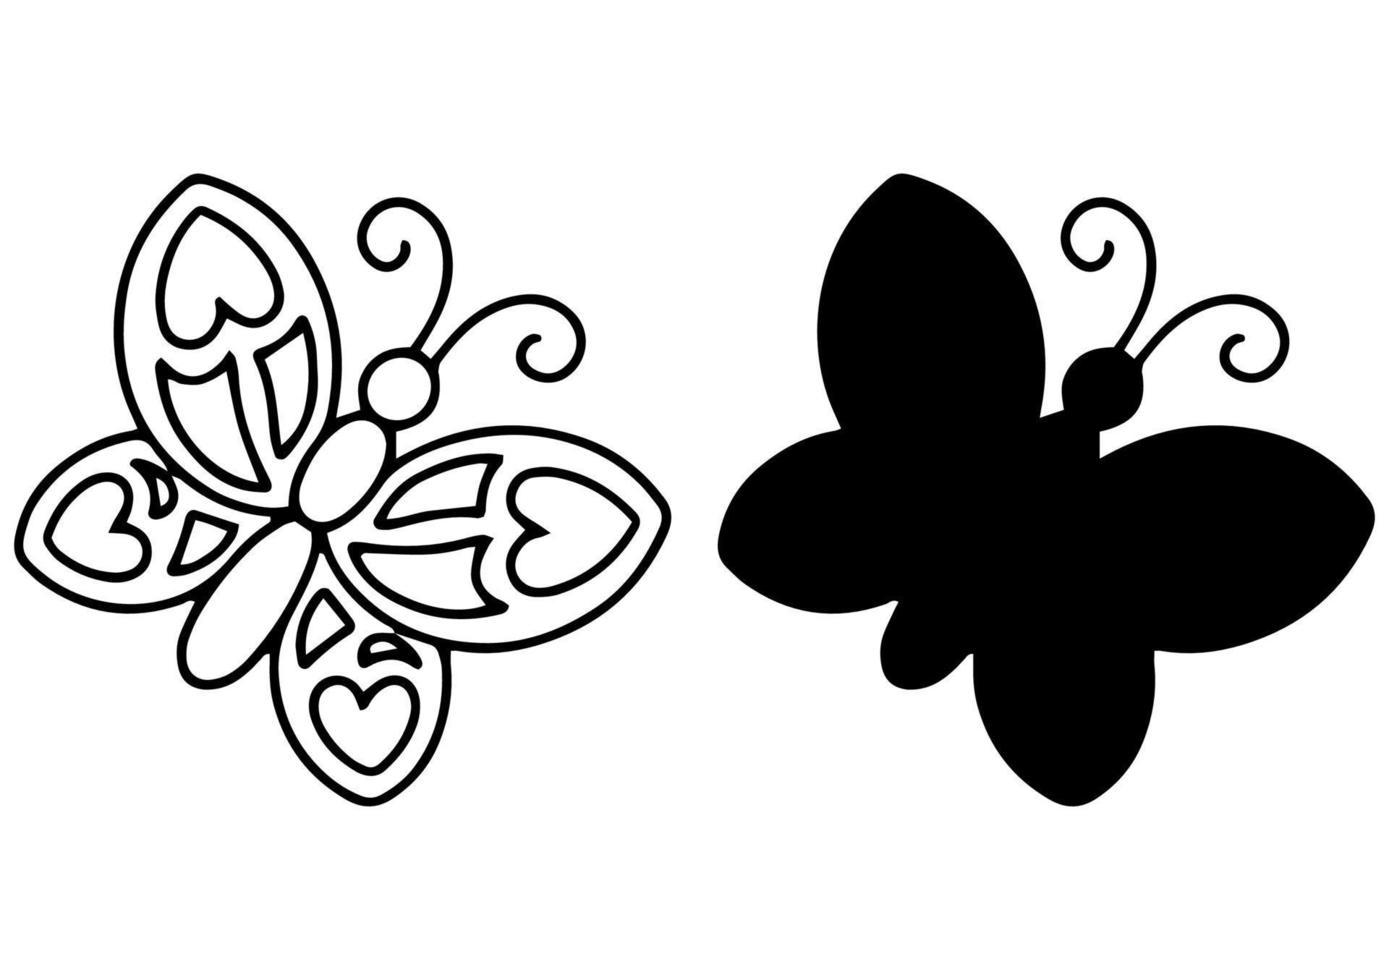 Insect butterfly. Black silhouette. Design element. Vector illustration isolated on white background. Template for books, stickers, posters, cards, clothes.